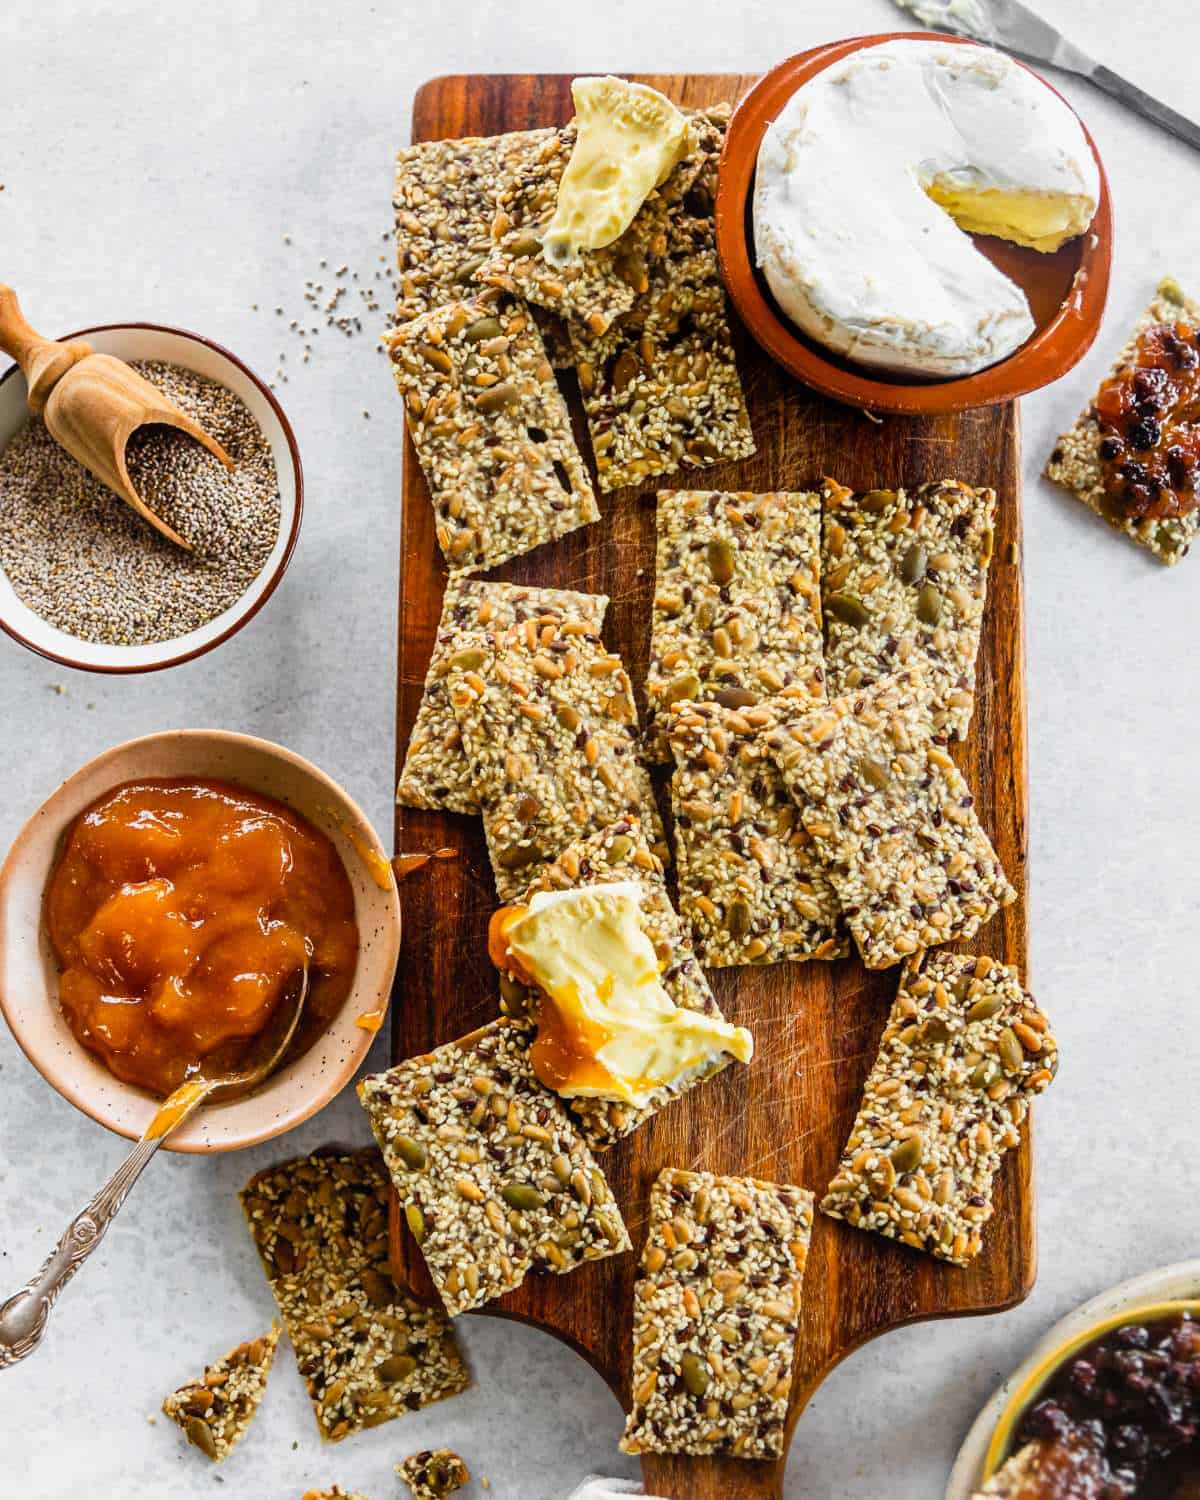 Cooked seeded crackers being served with cheese and chutney on a wooden platter